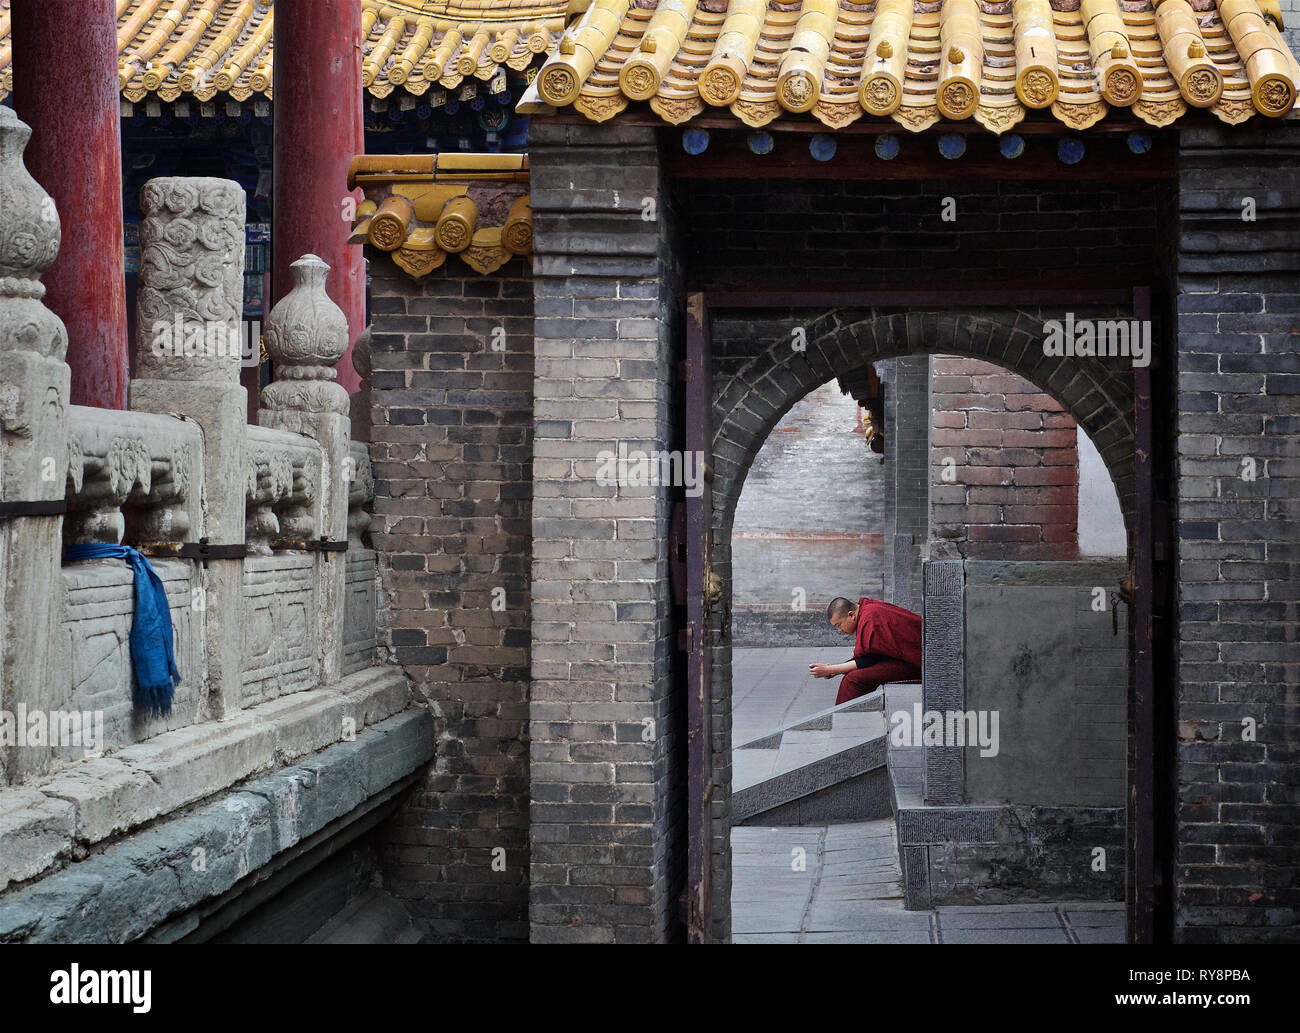 Monk with is mobile phone, Wutai Shan, Shanxi, China Stock Photo